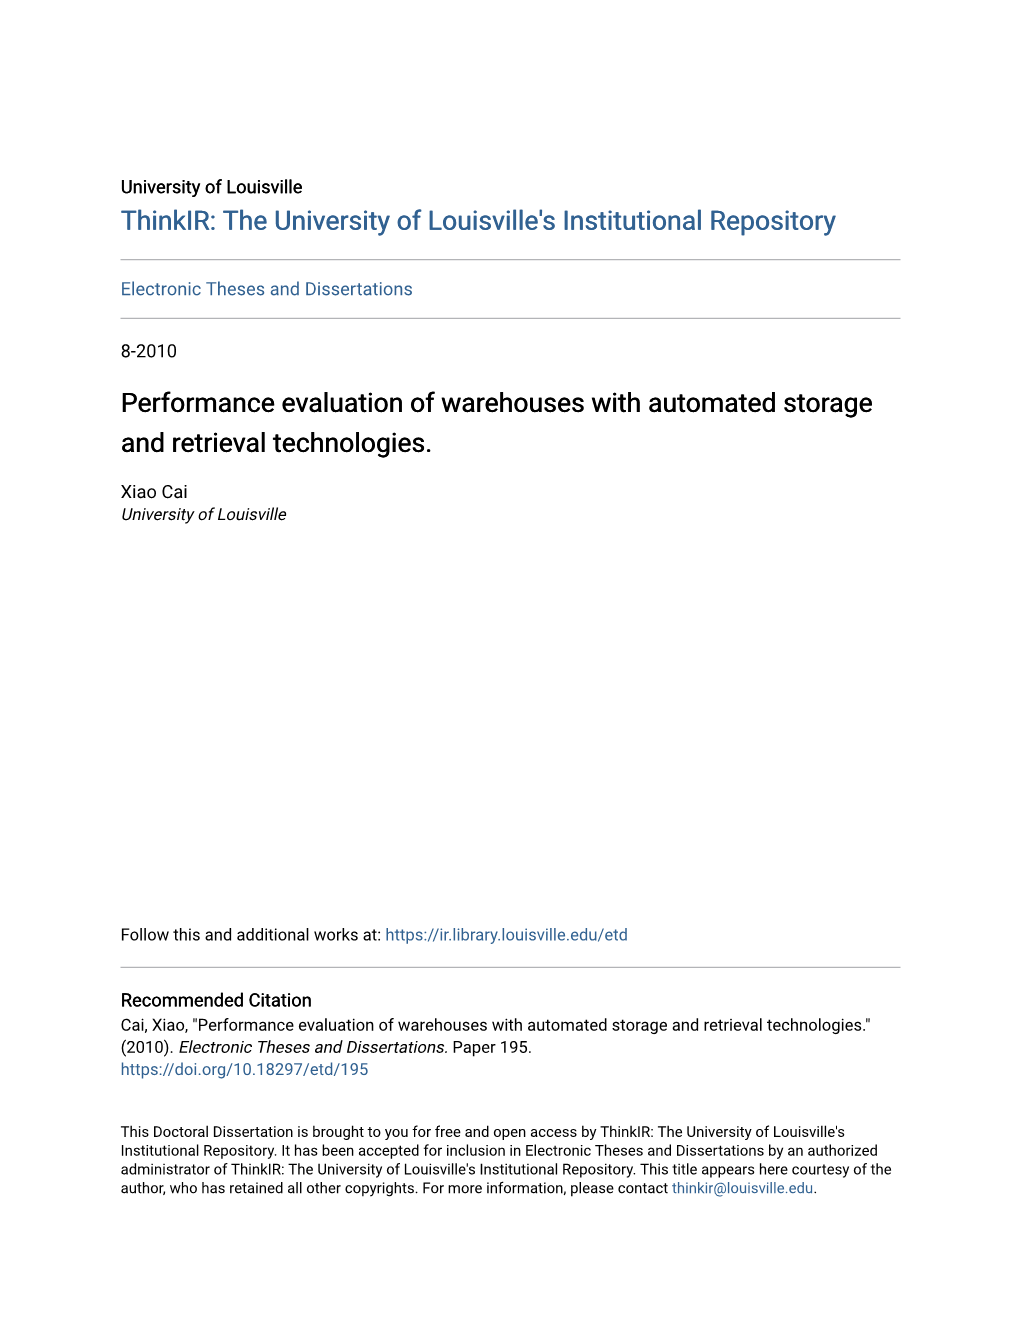 Performance Evaluation of Warehouses with Automated Storage and Retrieval Technologies